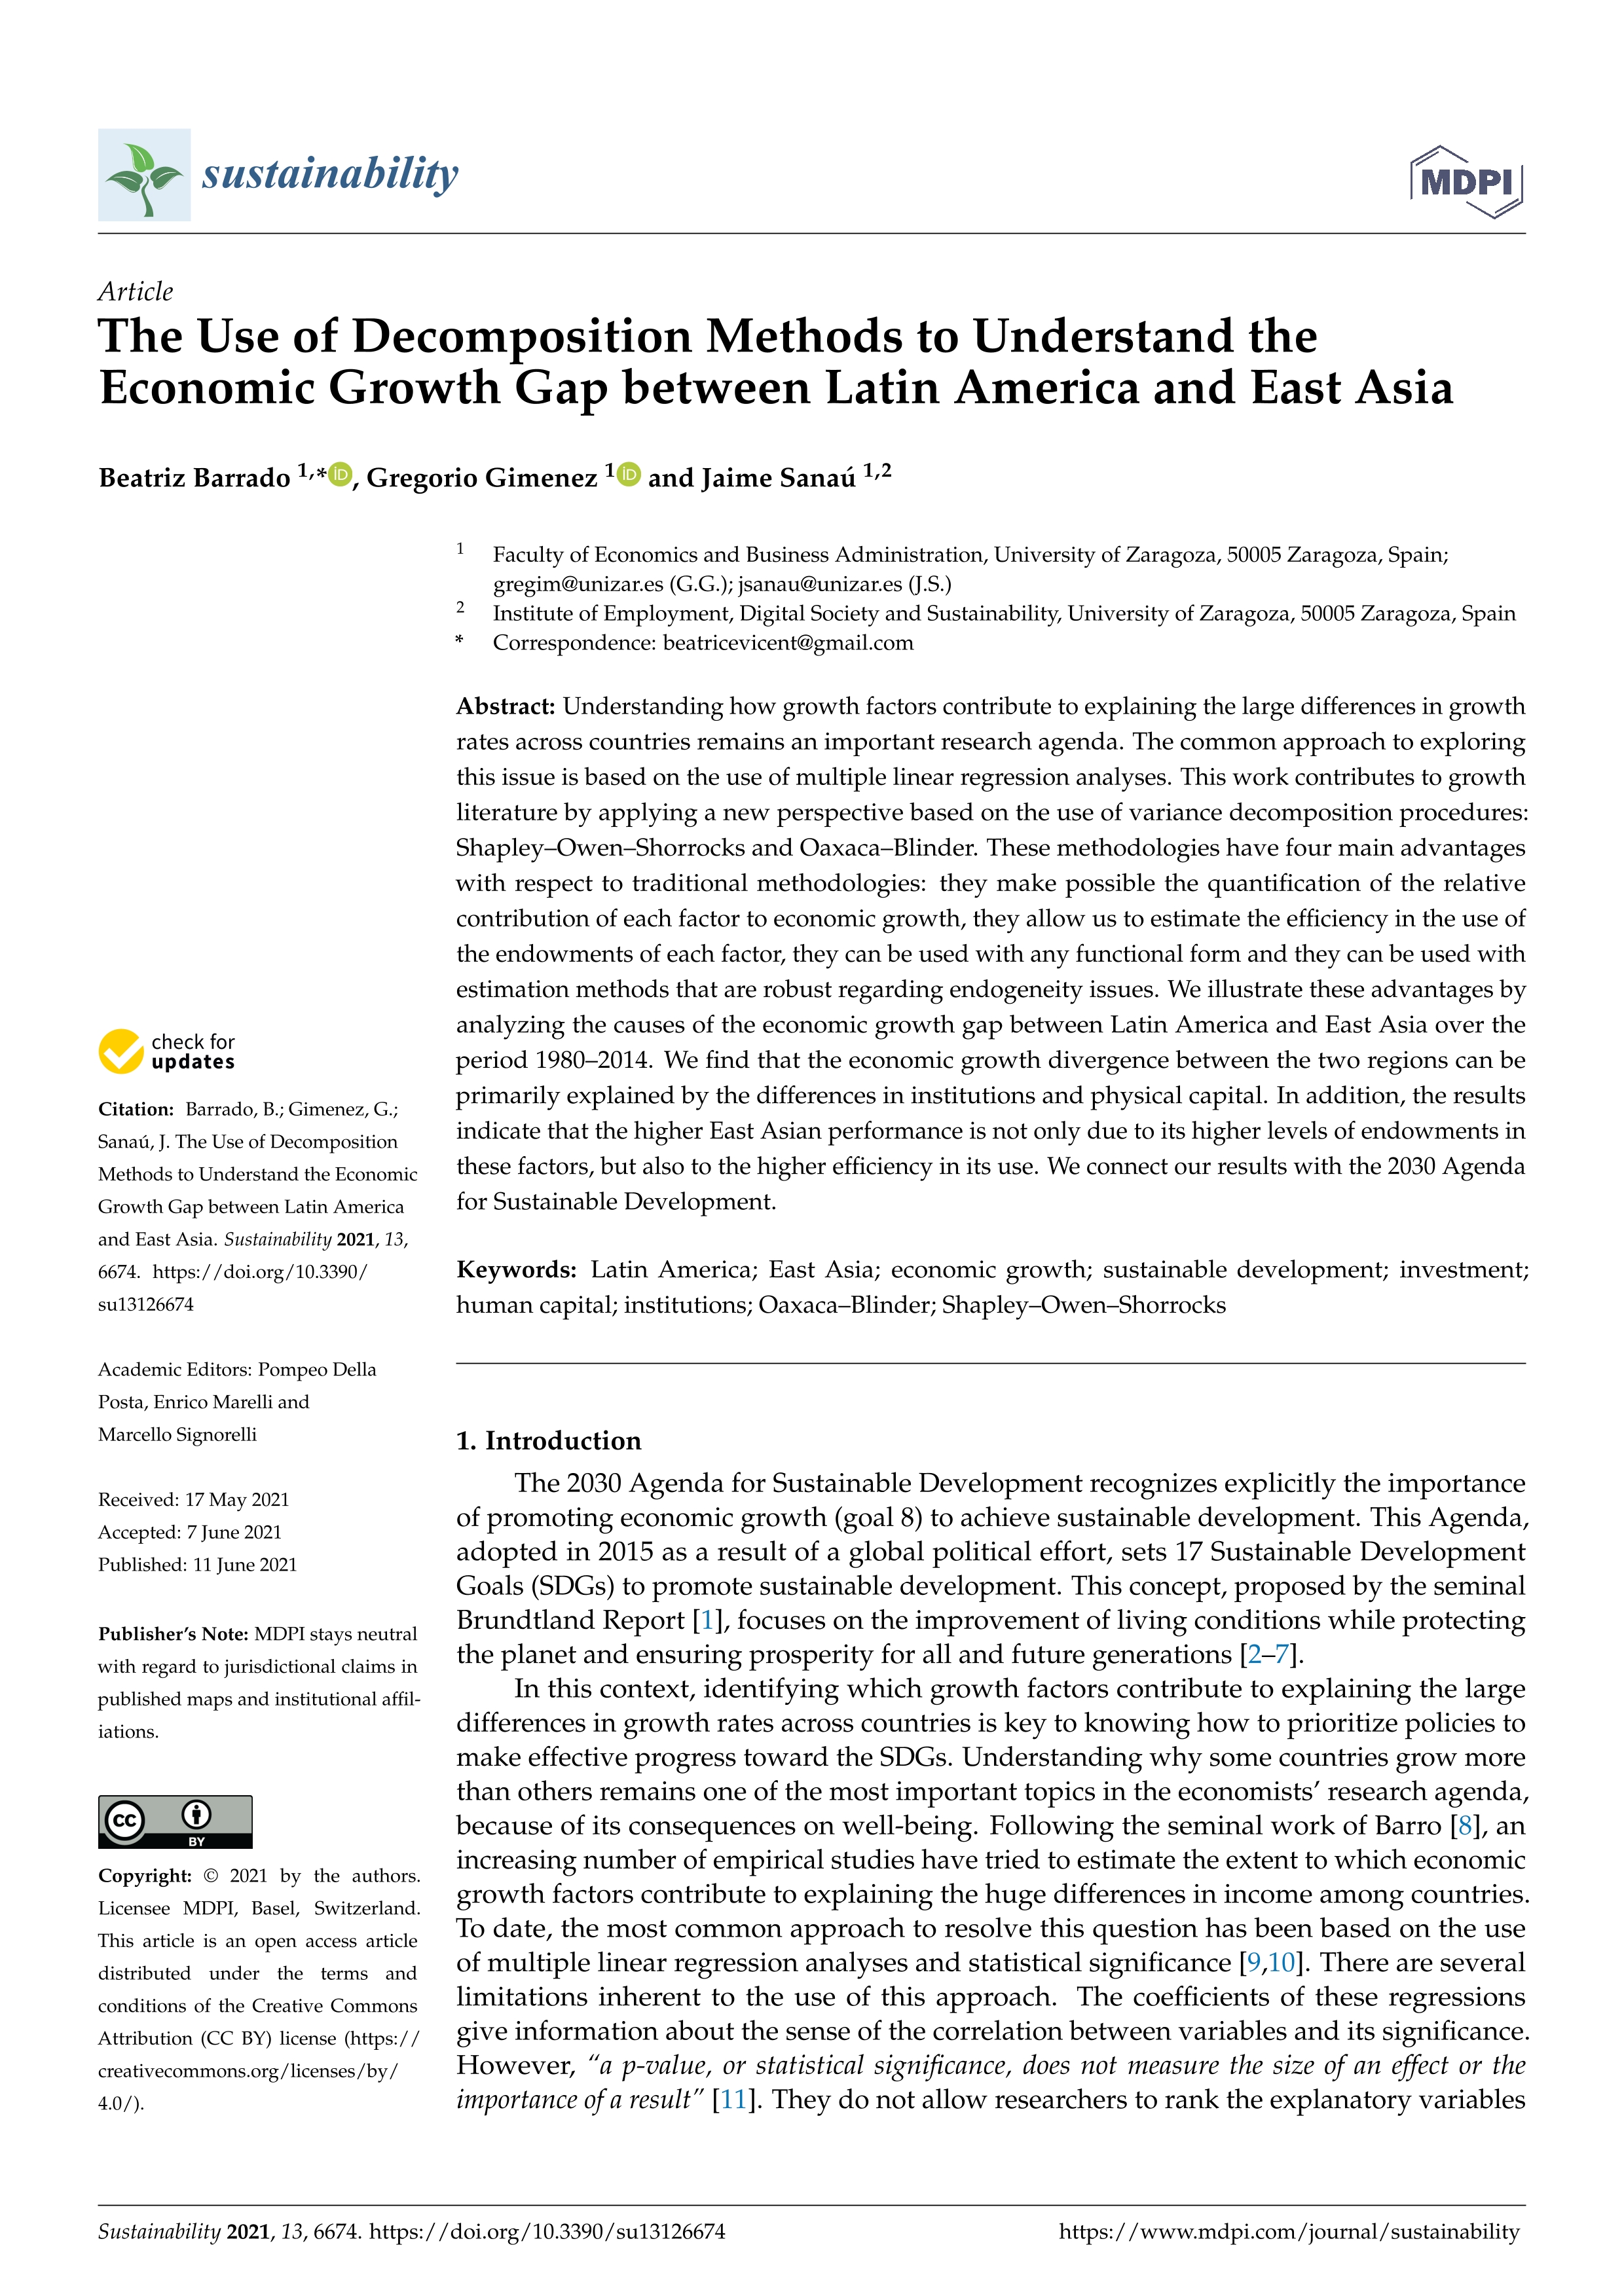 The use of decomposition methods to understand the economic growth gap between Latin America and east Asia